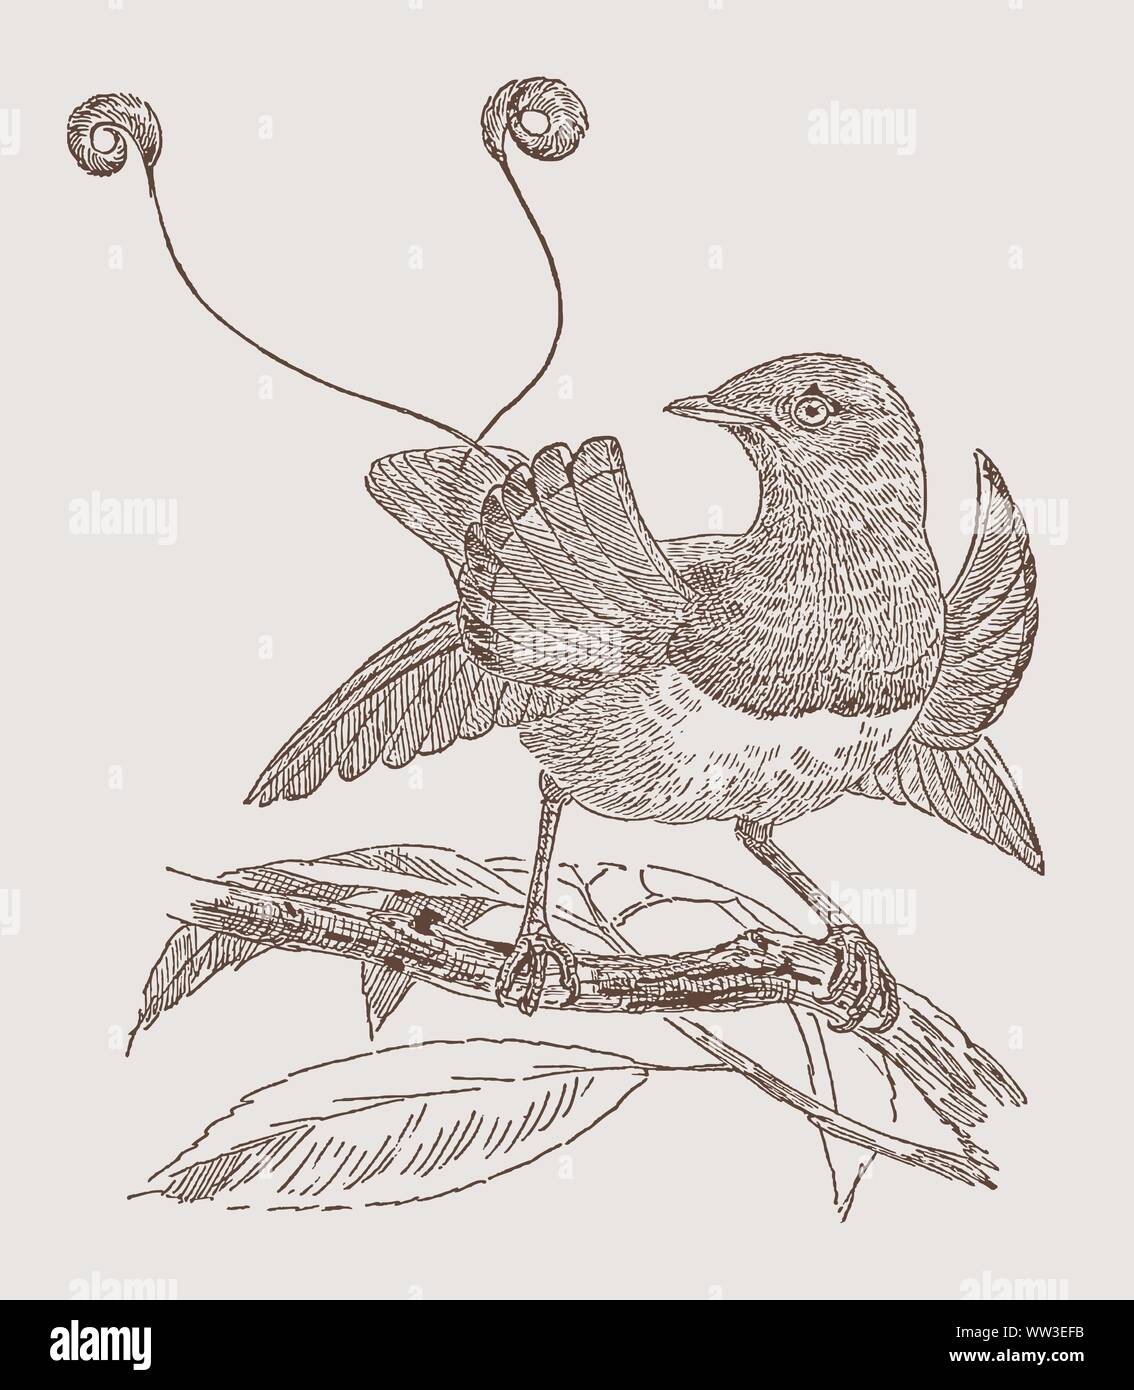 Red bird-of-paradise (paradisaea rubra, cendrawasih merah) sitting on a branch. Illustration after an engraving from the 19th century Stock Vector